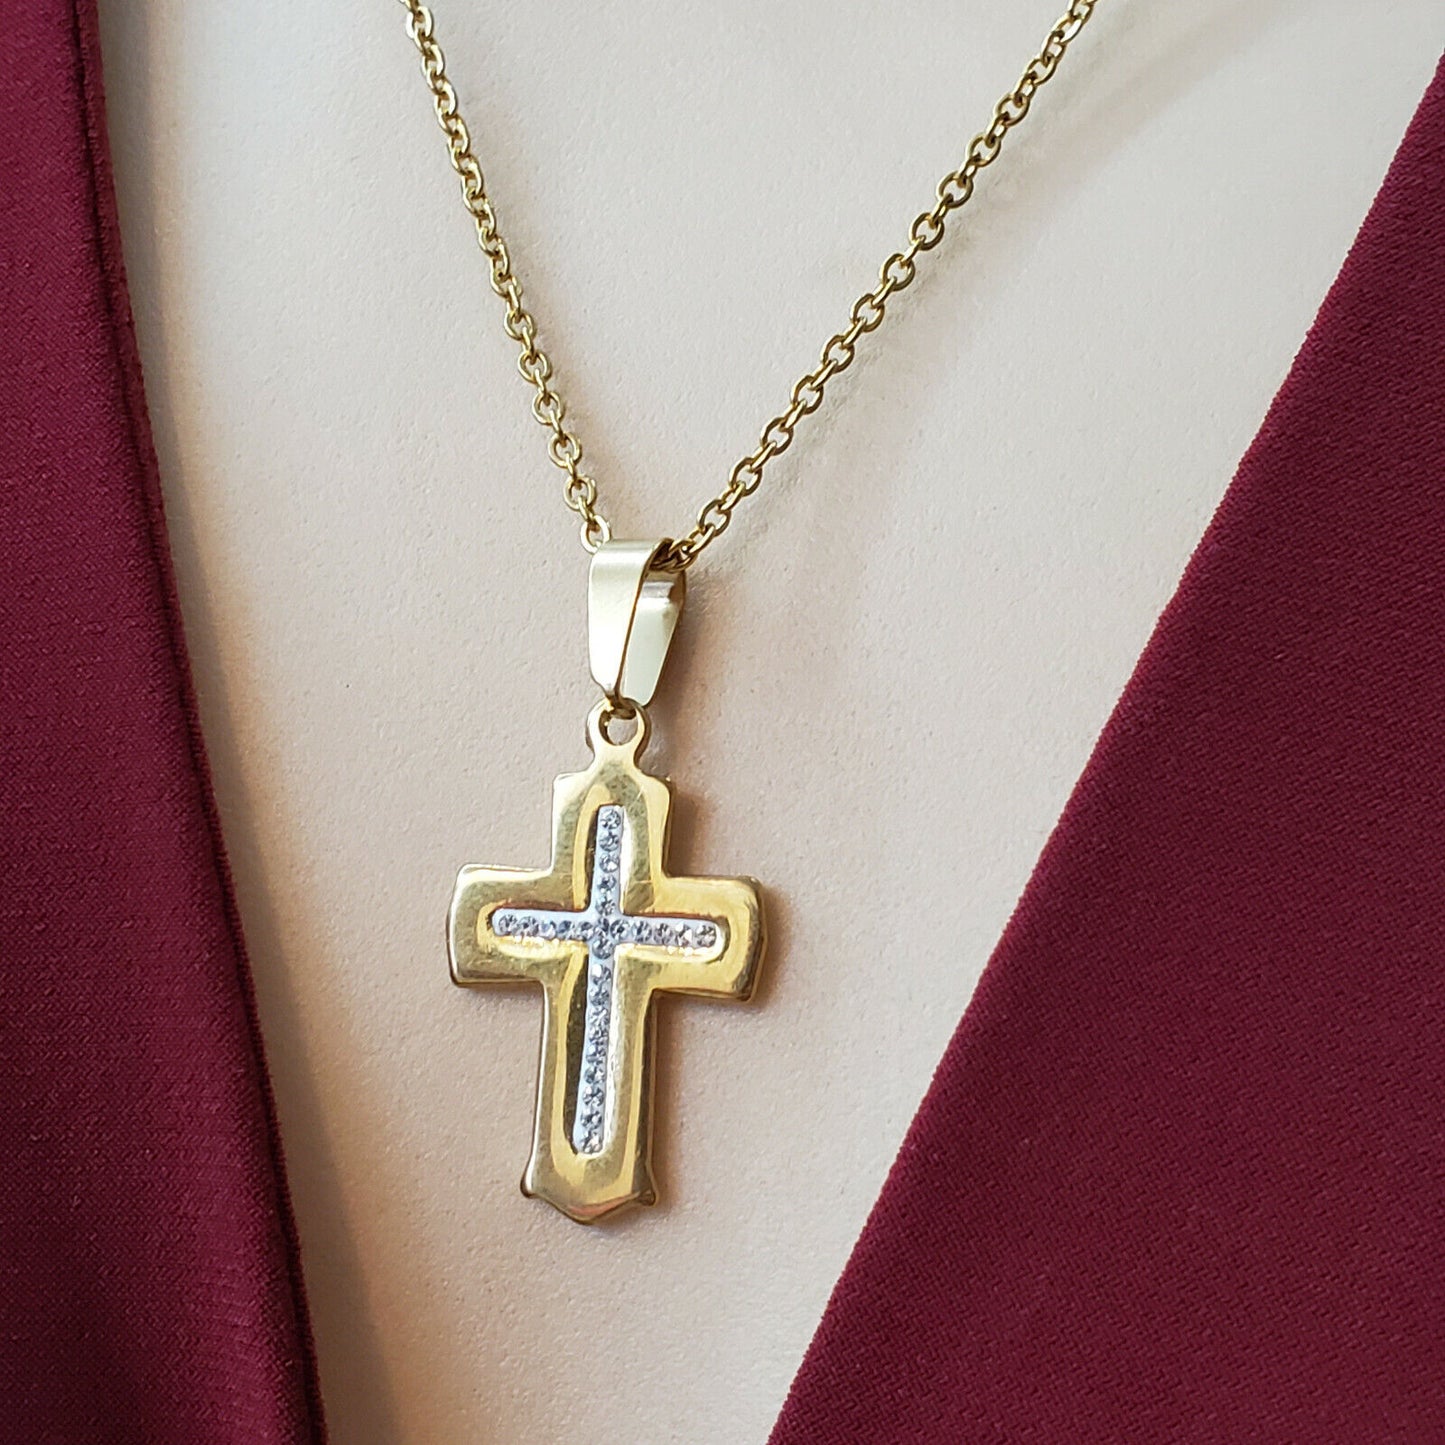 Necklaces - Stainless Steel Gold Plated. Cross Pendant & Chain.